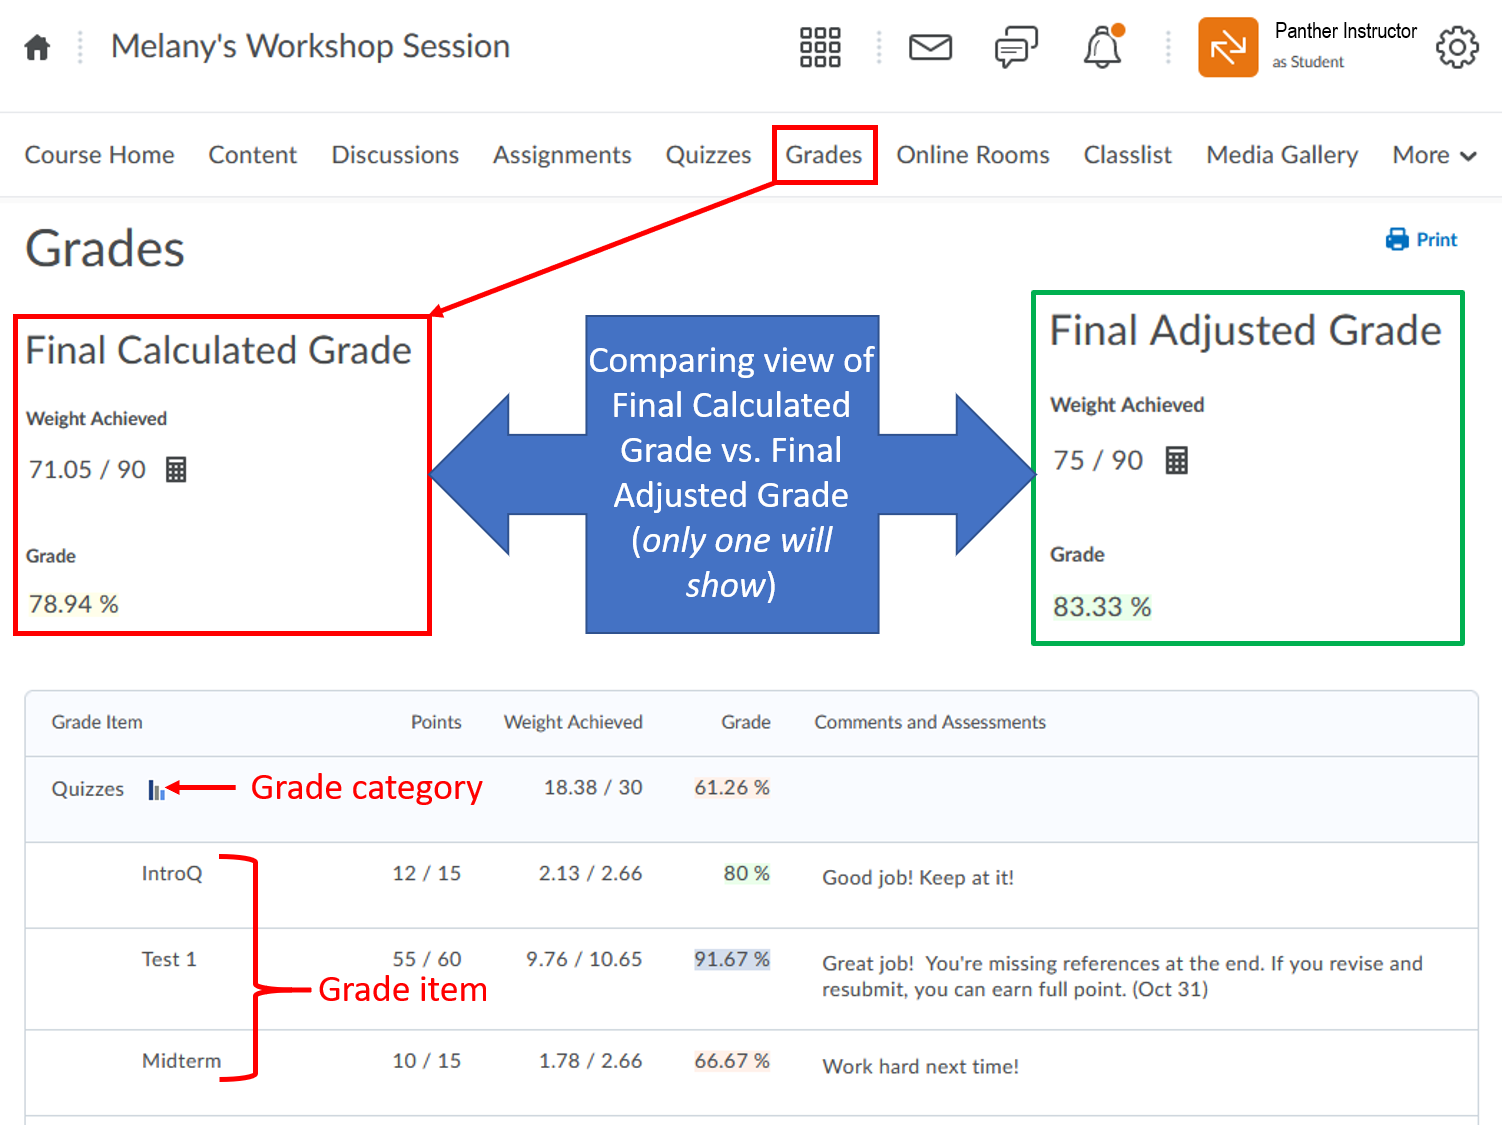 Grades-instructor view as student